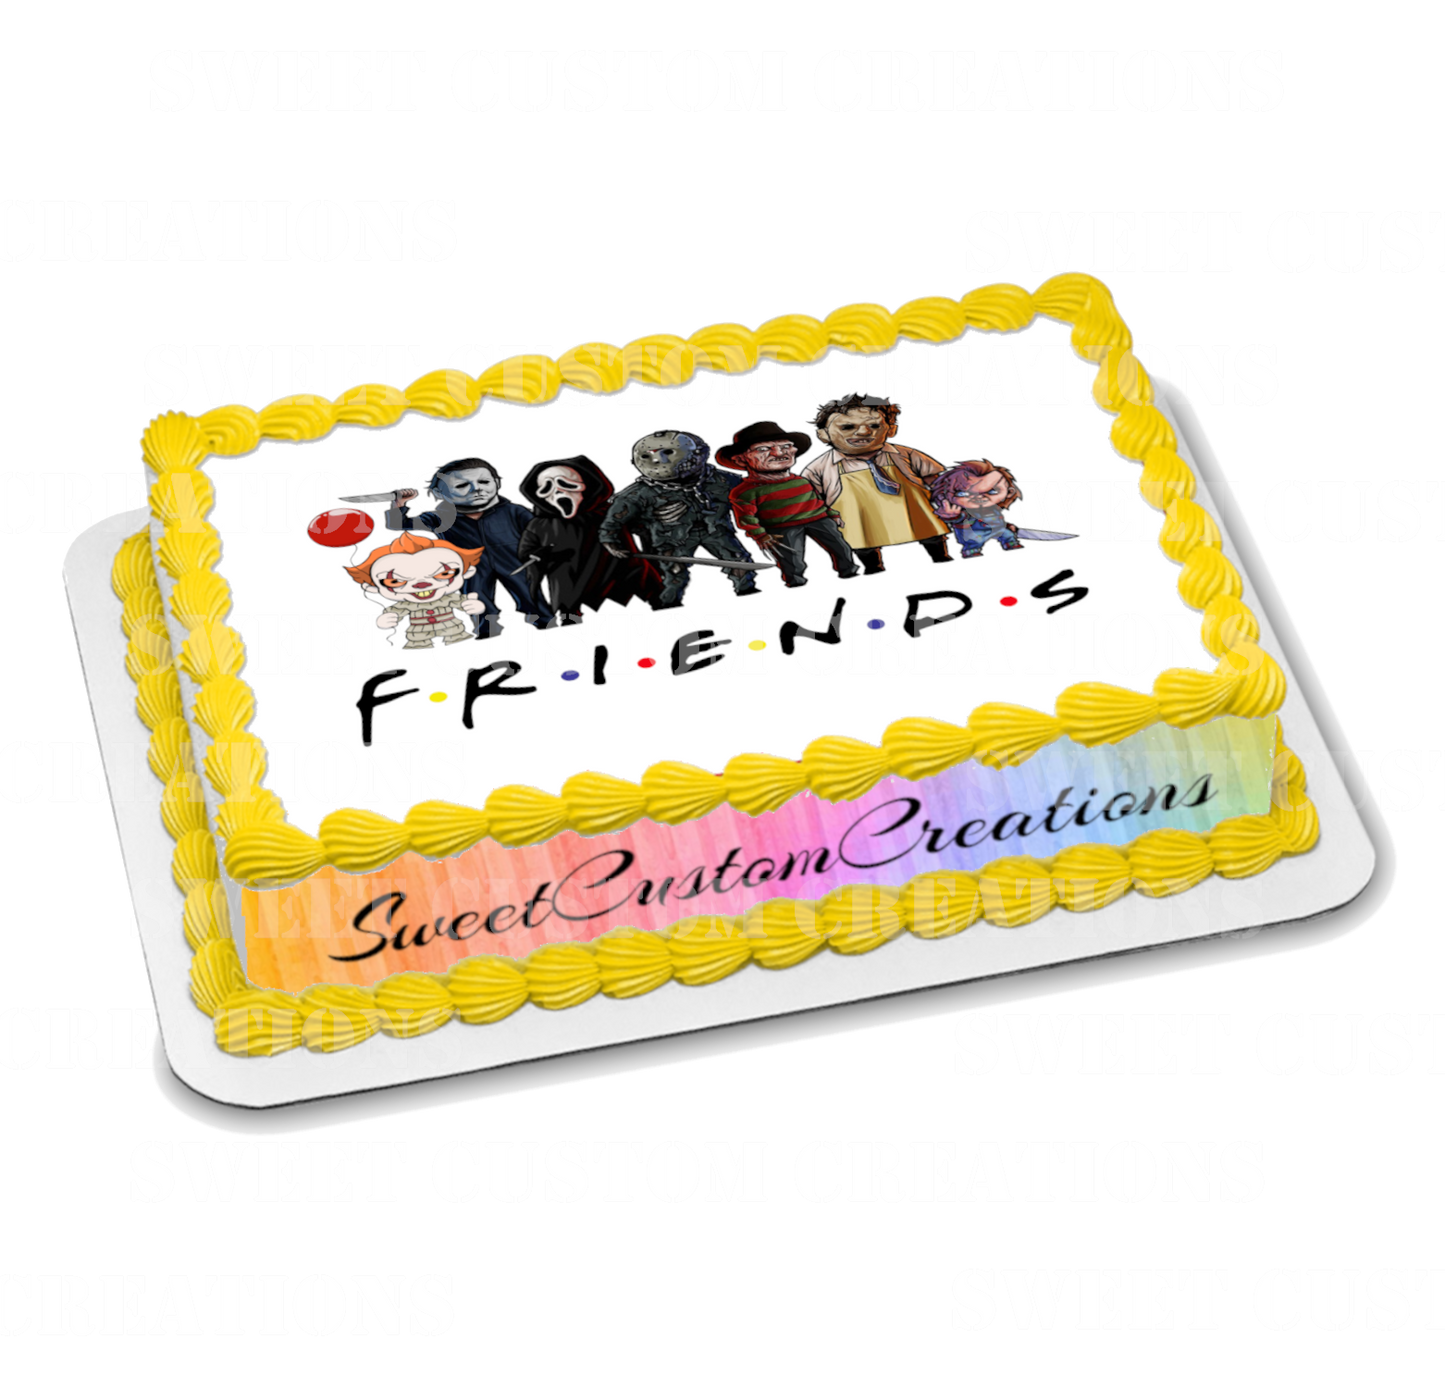 Horror Movie Friends Edible Image Frosting Sheet #3 (70+ sizes)